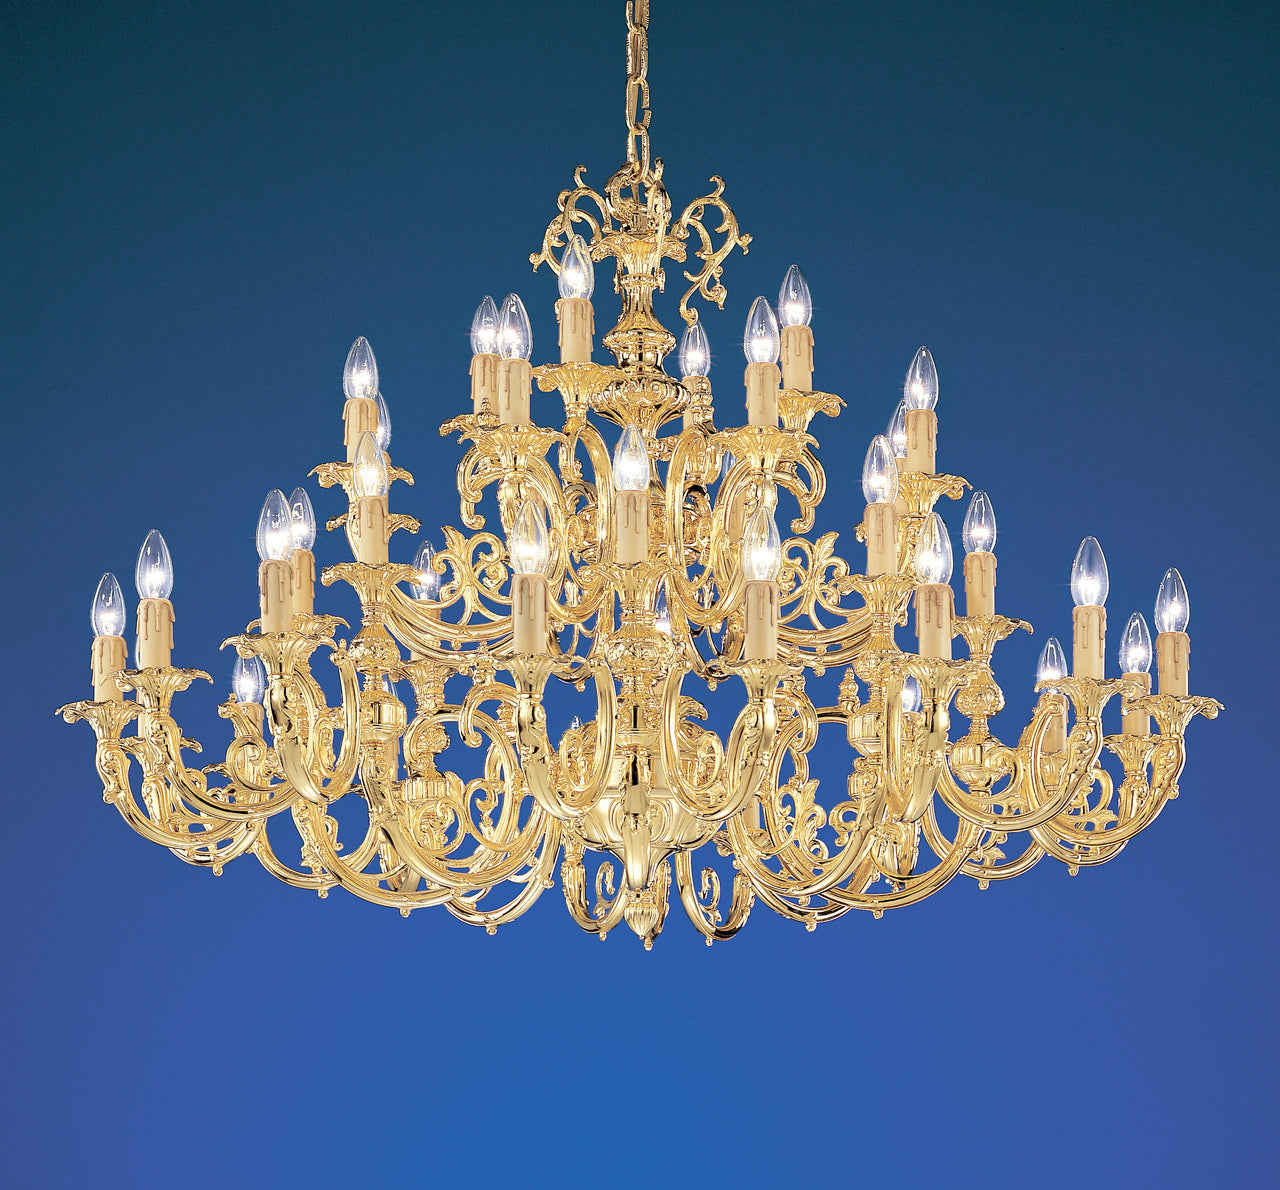 Classic Lighting 5736 G C Princeton Crystal/Cast Brass Chandelier in 24k Gold (Imported from Spain)